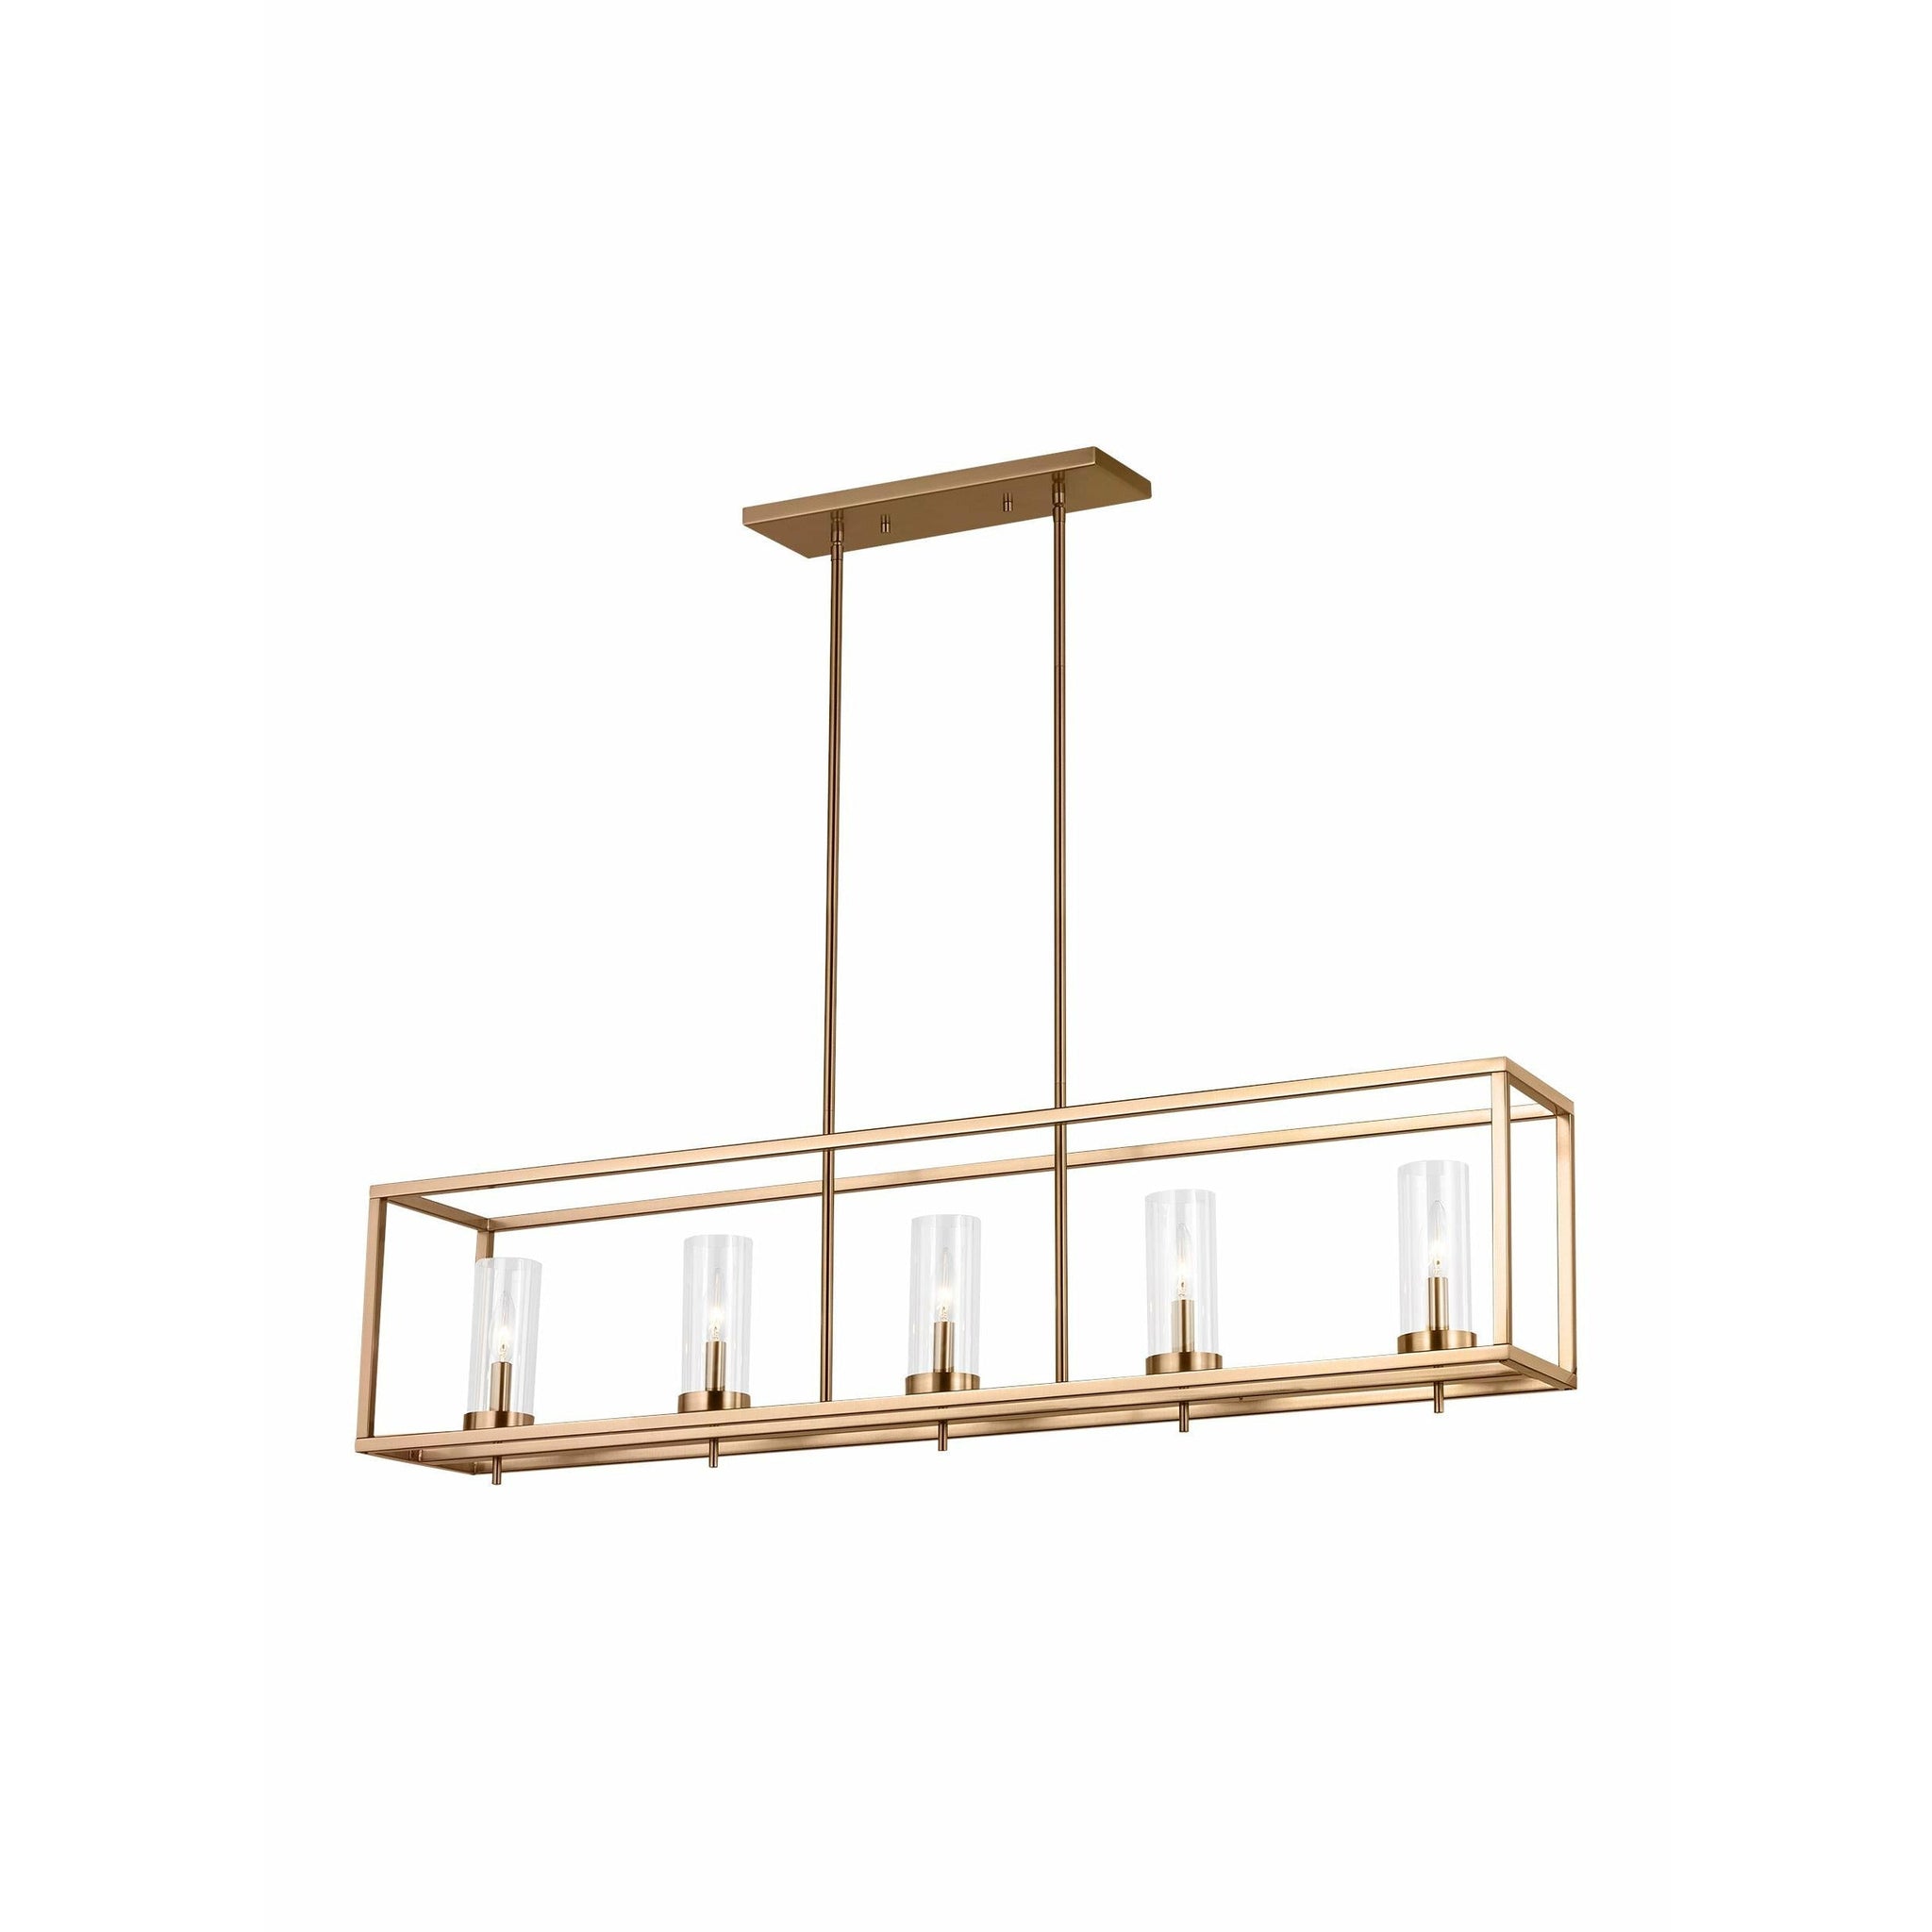 Zire 5-Light Linear Suspension (with Bulbs)